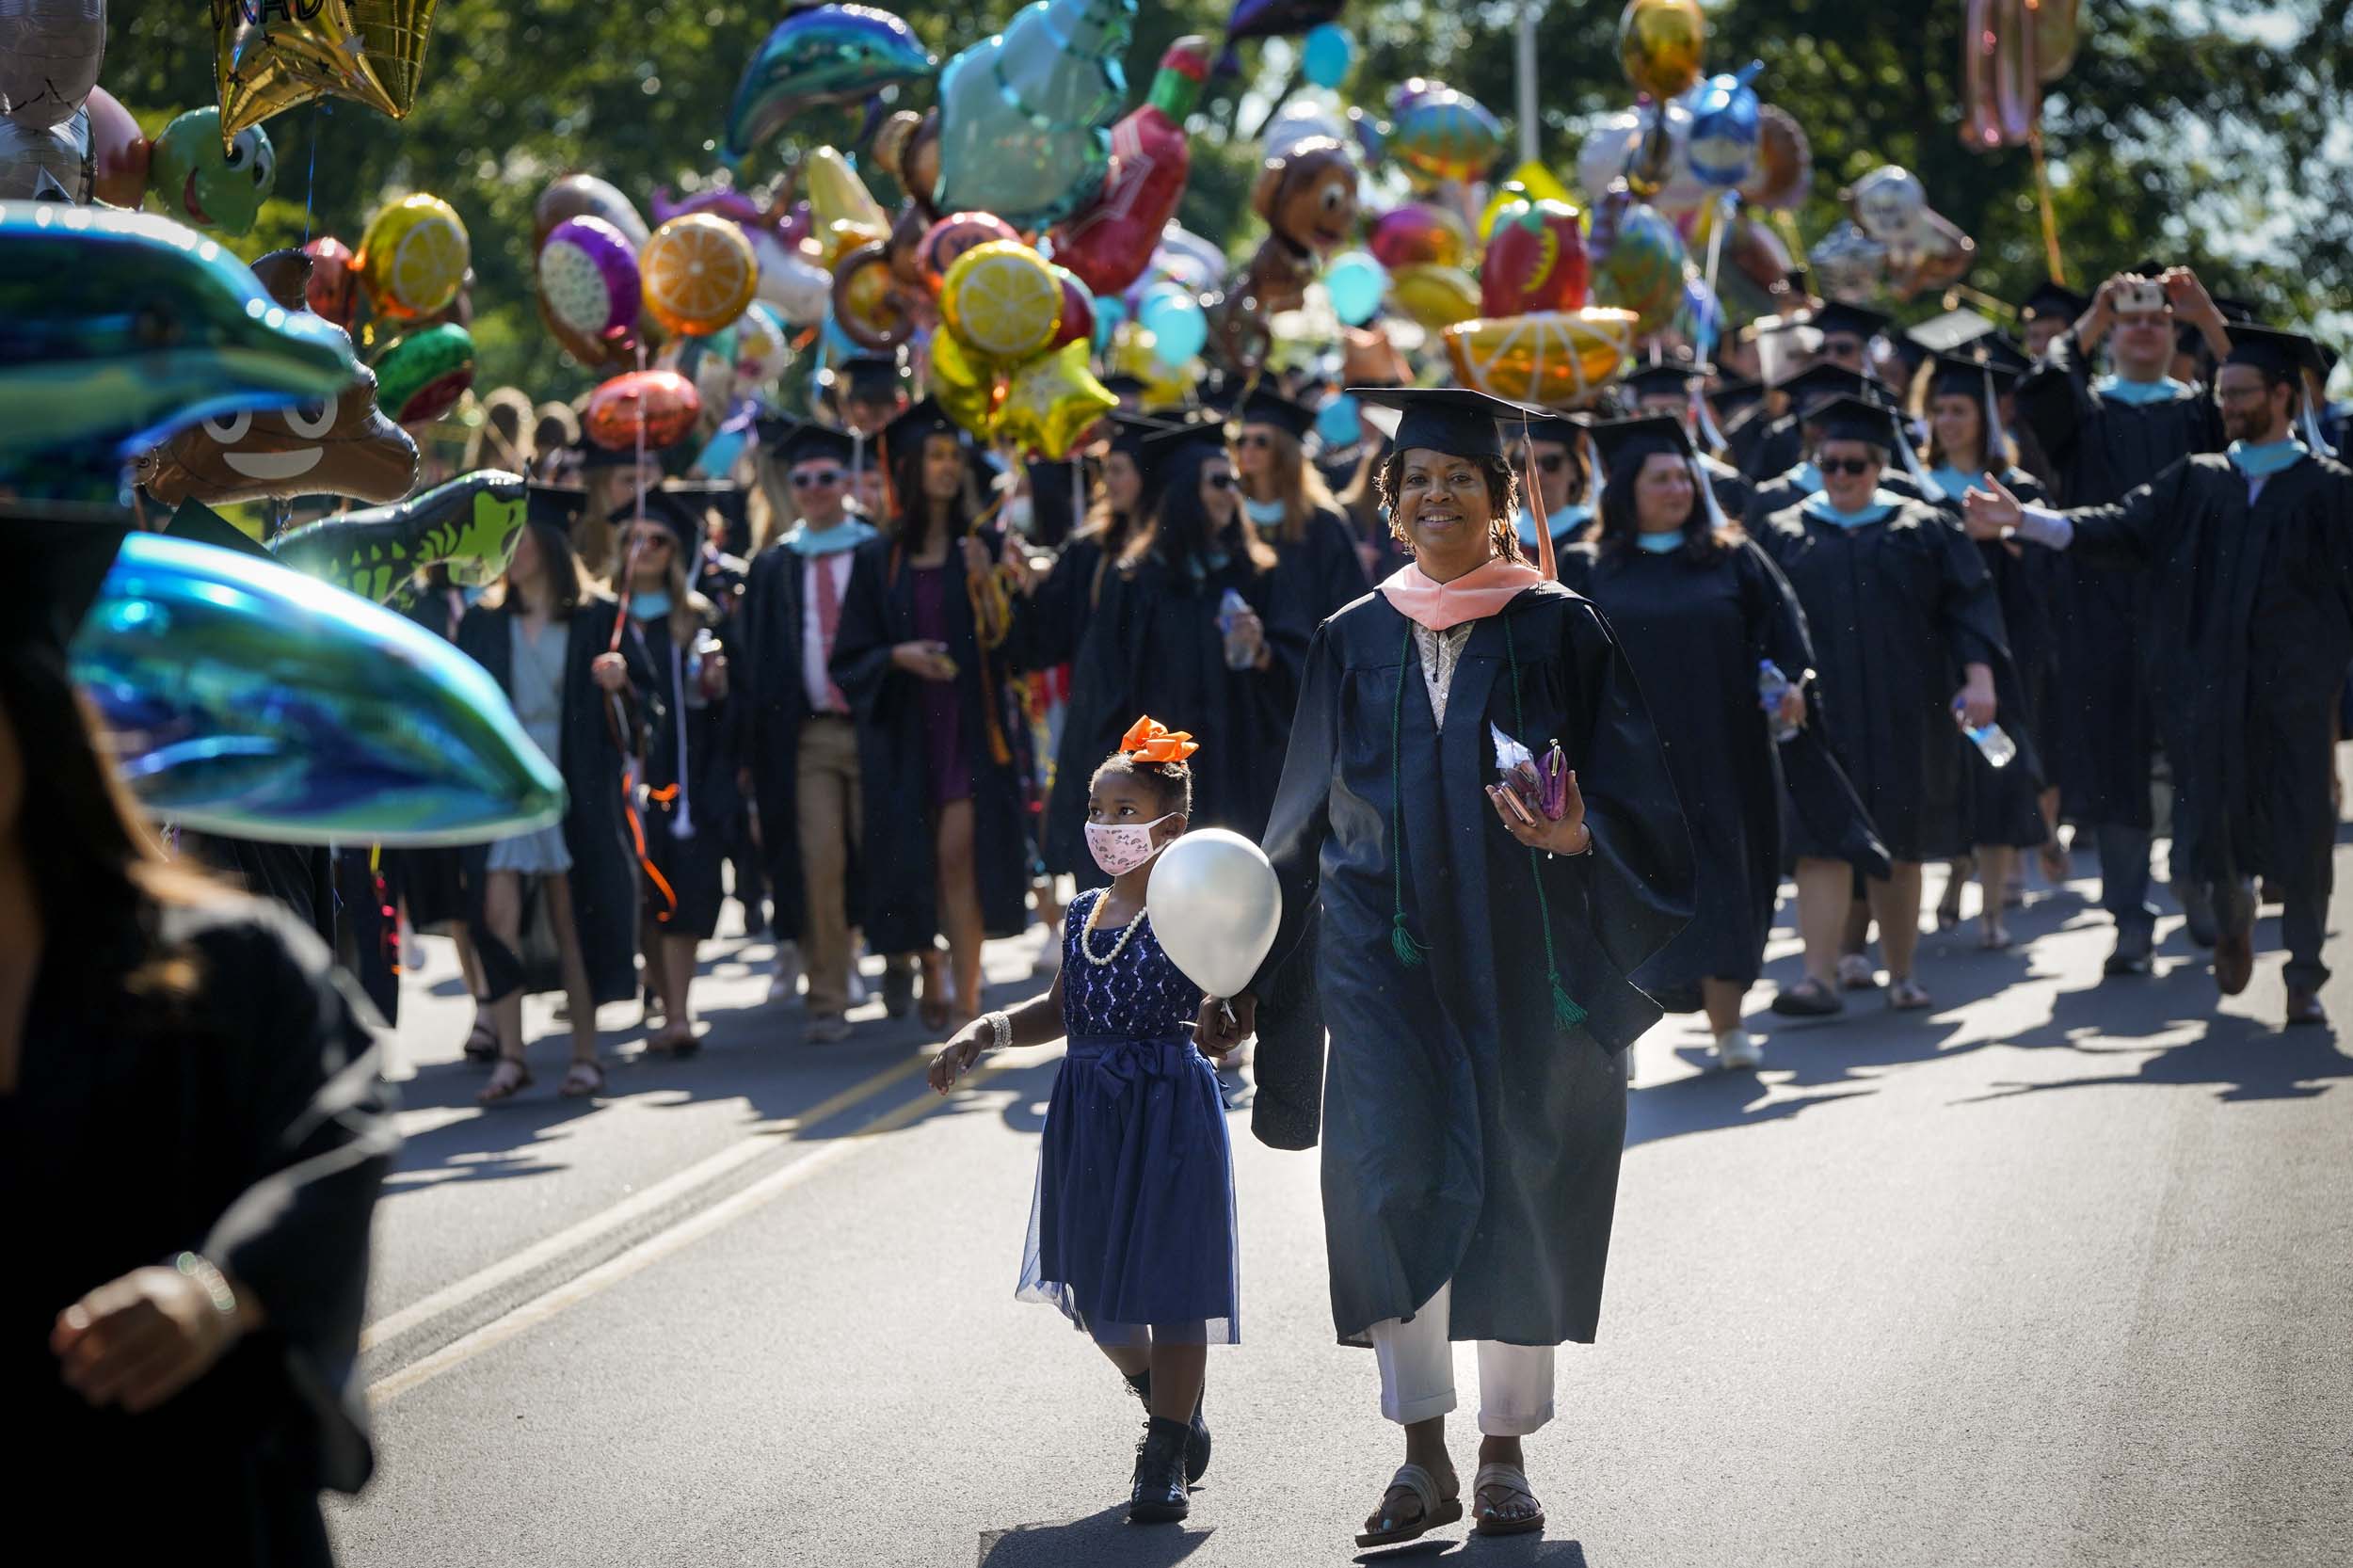 Graduate walk to Final exercises with her daughter